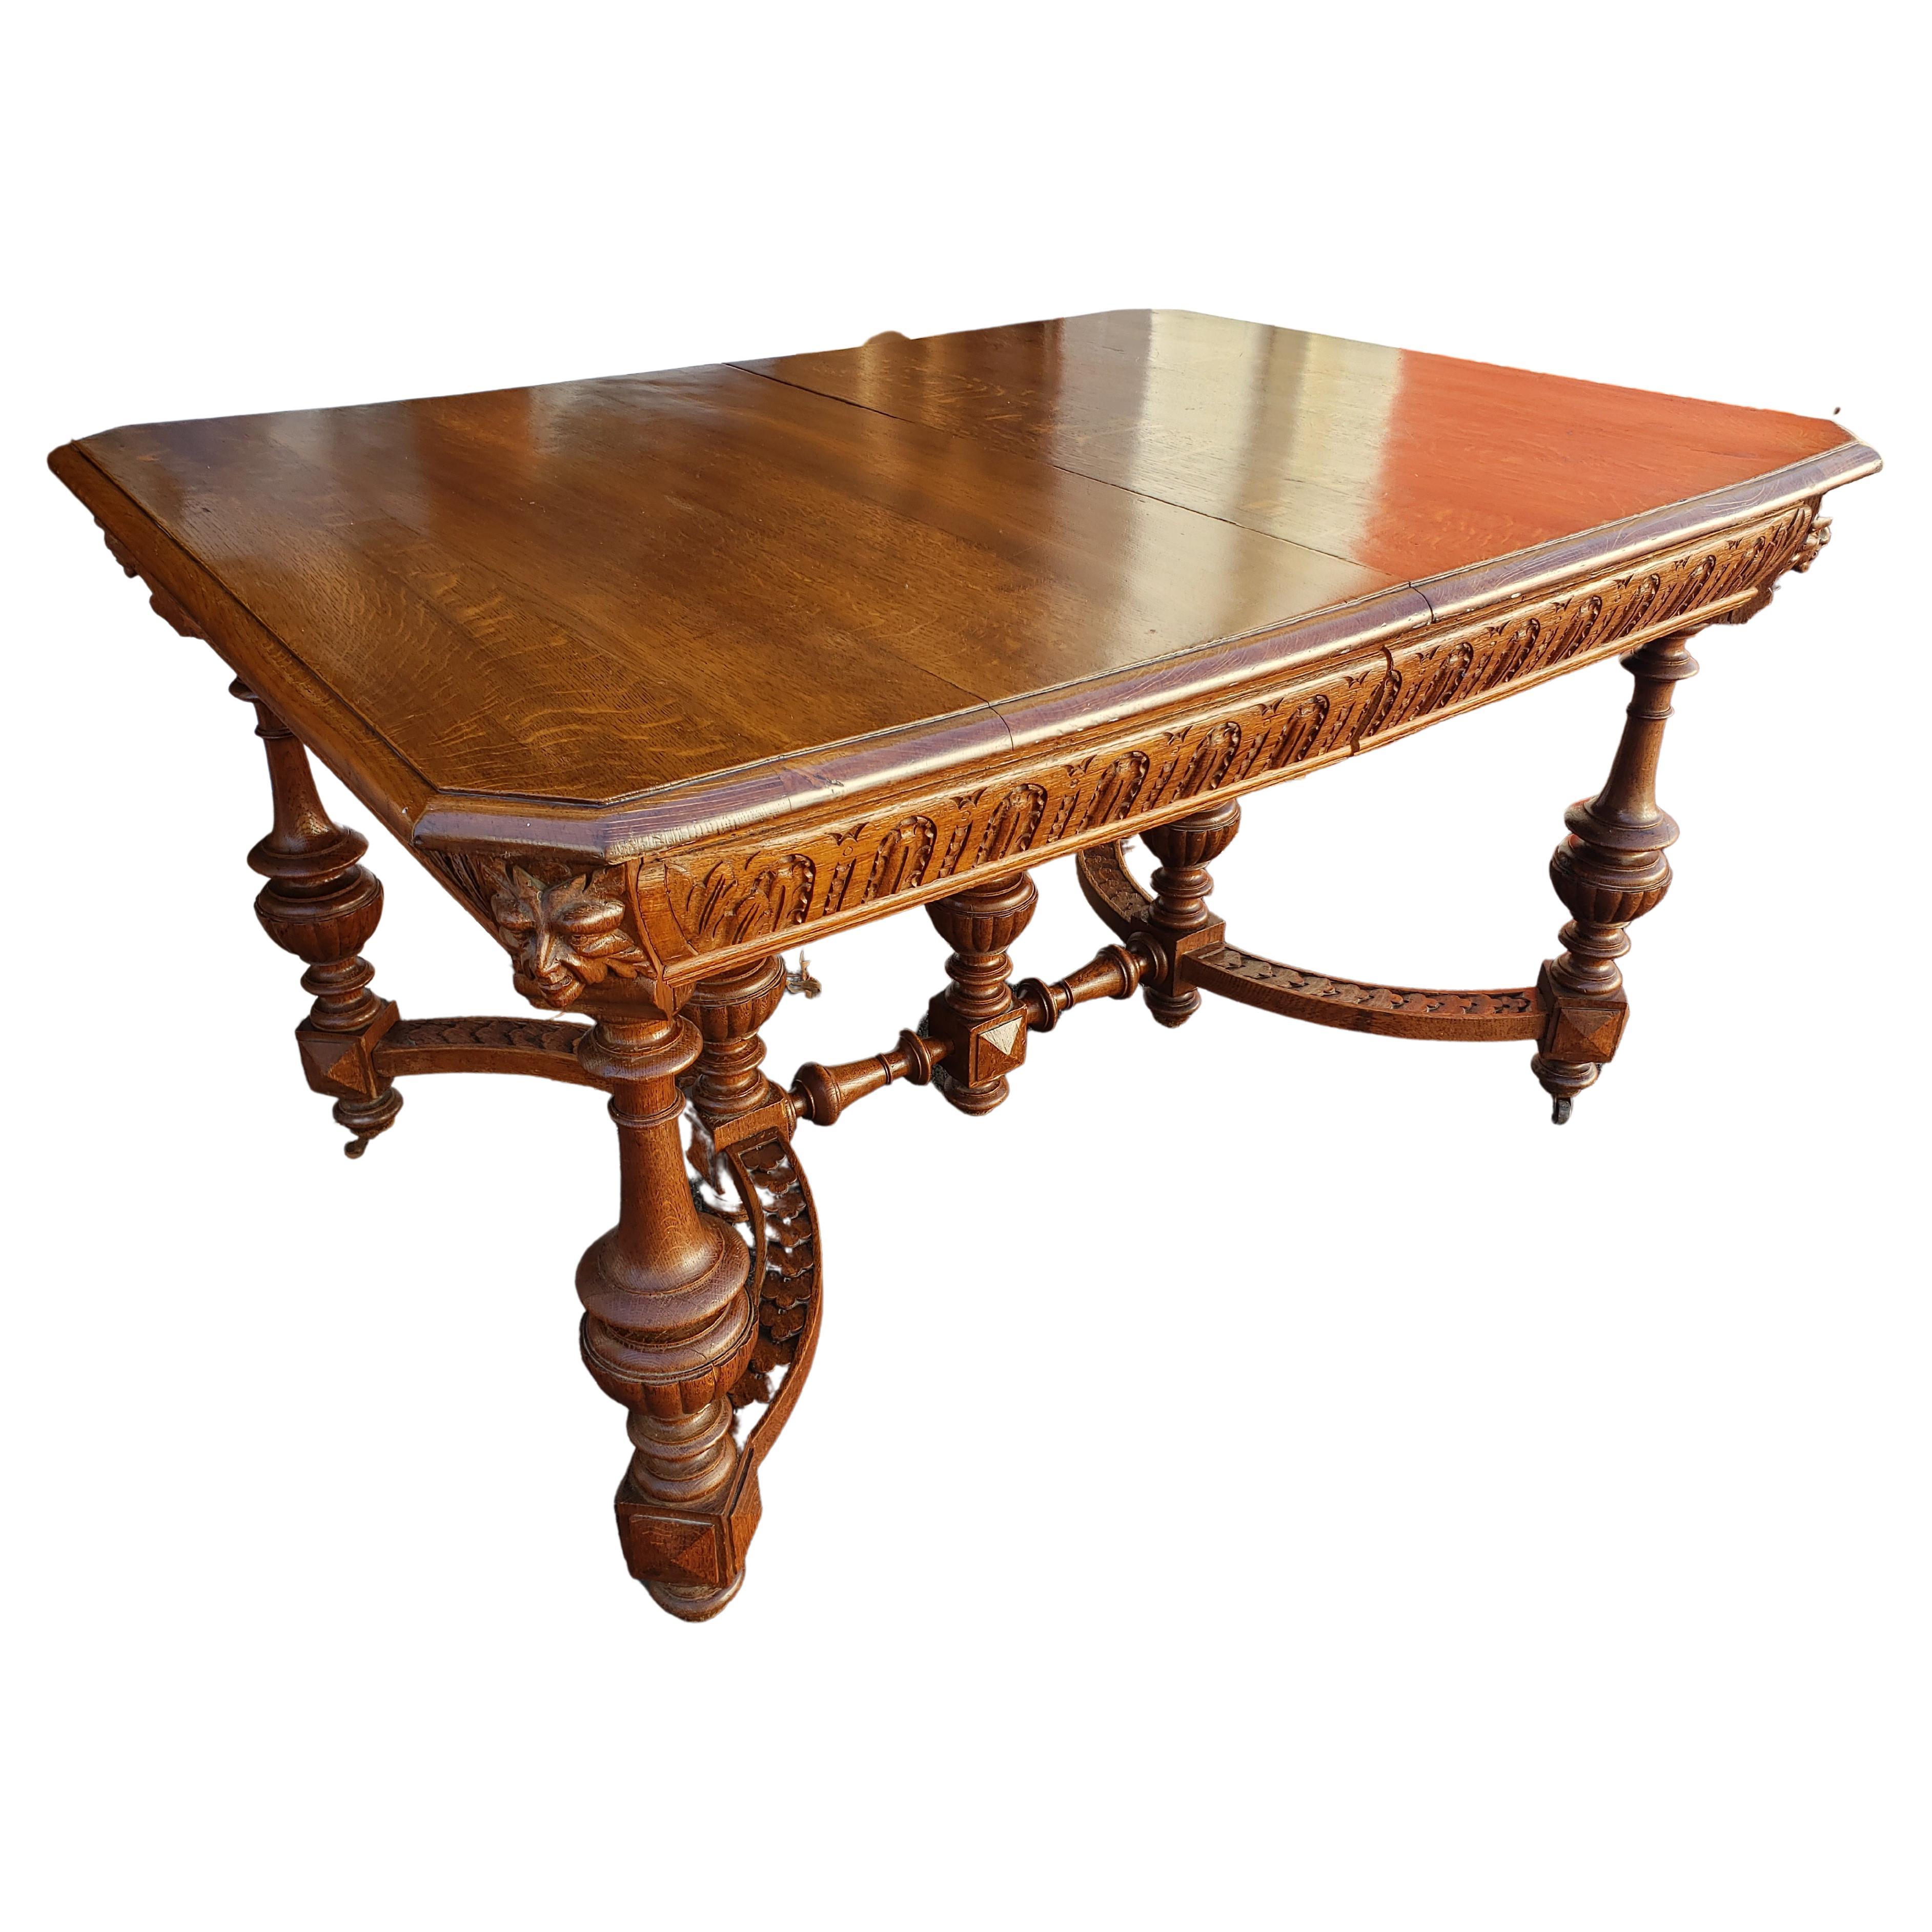 Gorgeous Hand carved oak Jacobean style dining table. Use as a library/office table or desk. Beautiful oak top with substantial hand carved legs and stretchers on original casters. Perfect for an English Tudor, French Country, Craftsman or cottage